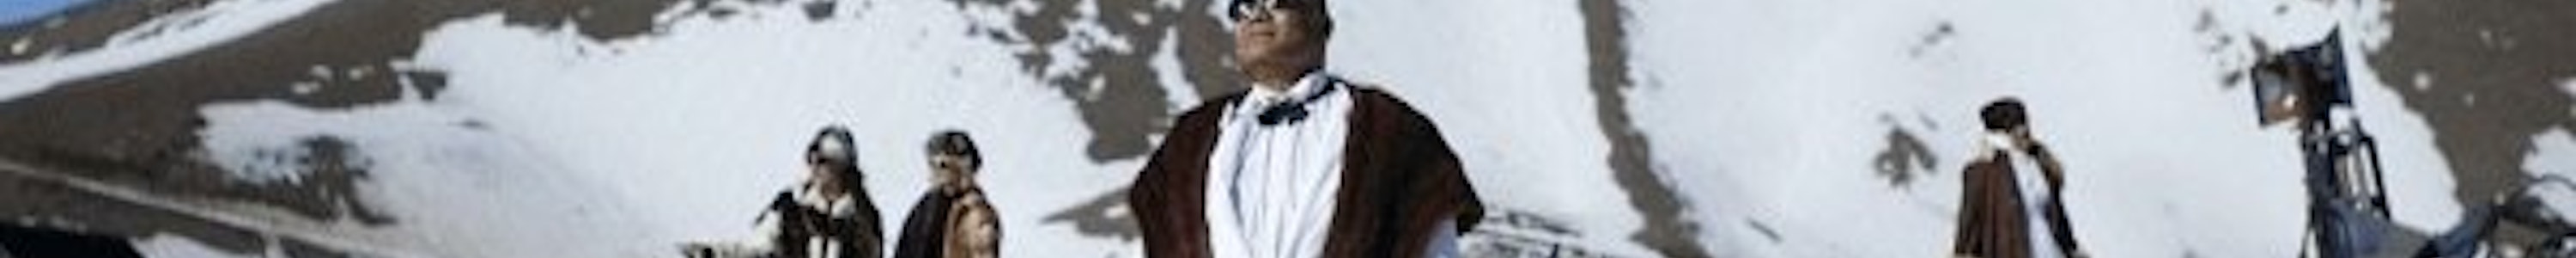 In this still of Christopher Ulutupu's video work the artist's father stands on a sunny, snowy mountain peak wearing a dapper white suit, sunglasses and fur throw, looking up towards the sun shining. The artist’s mother and sisters are in the background all wearing glamorous clothing in the bright snow